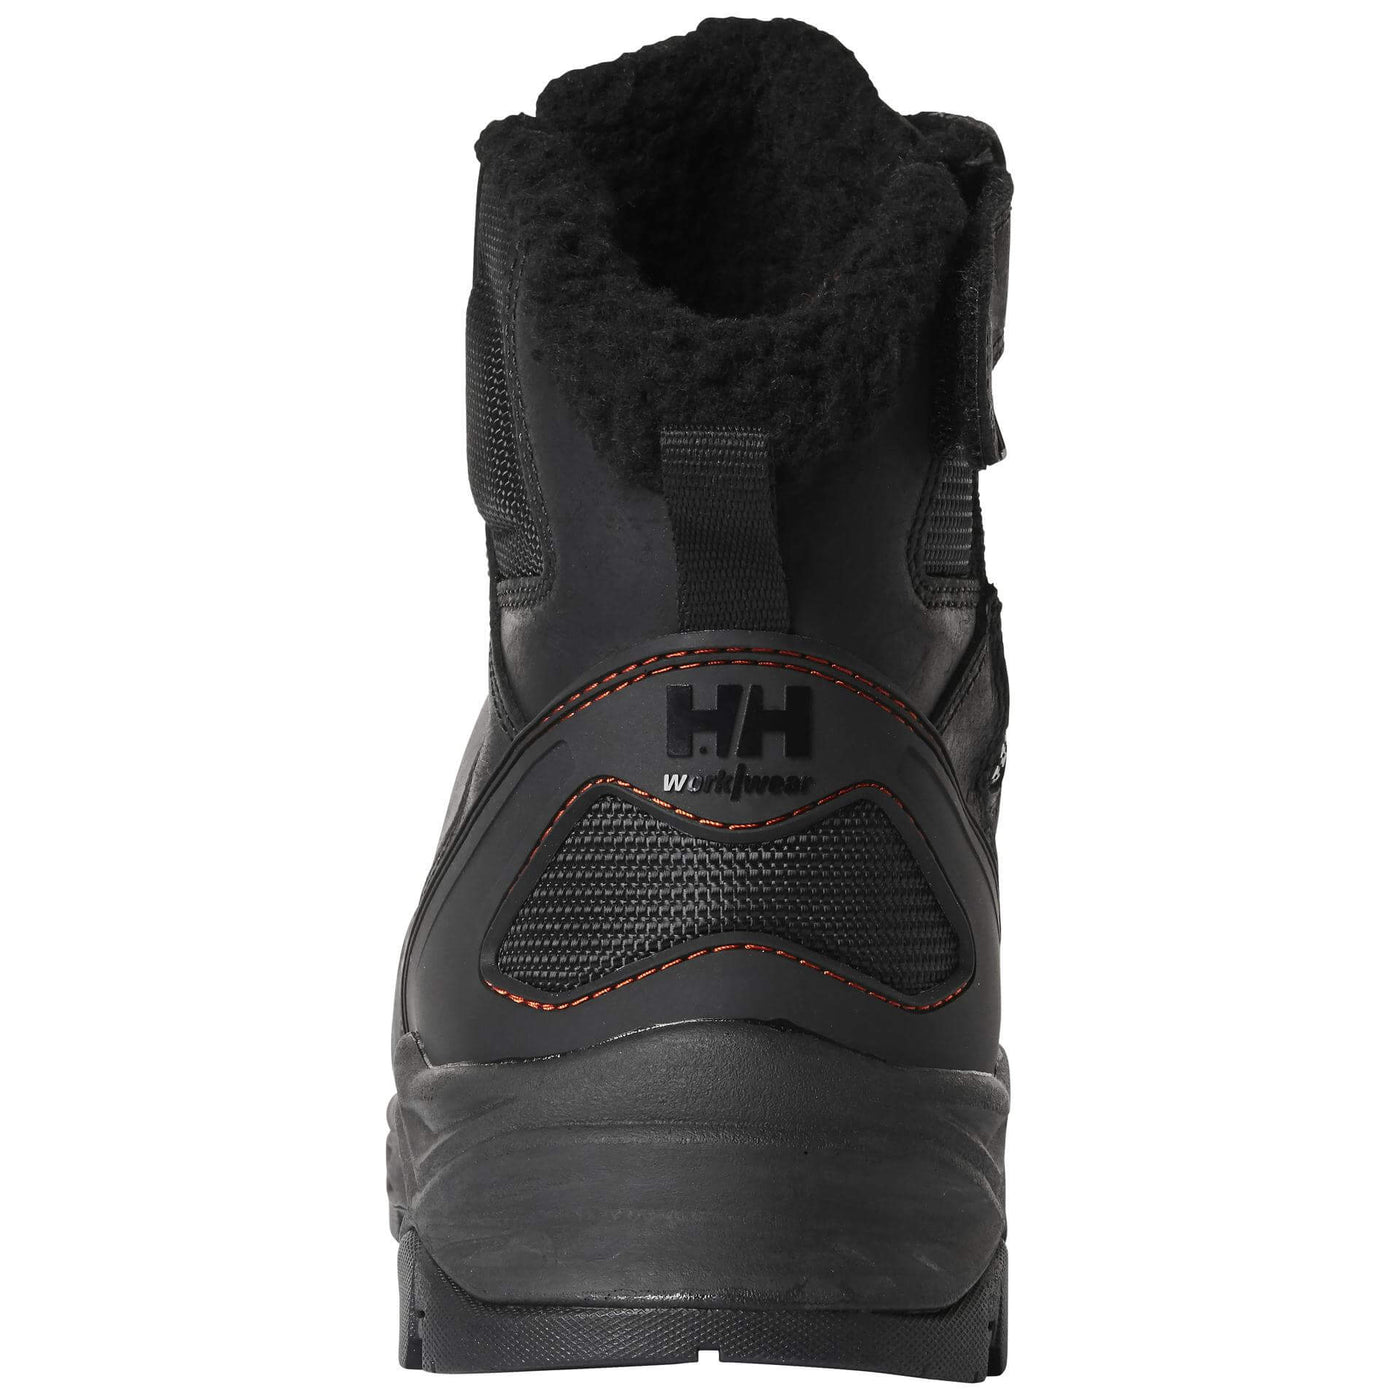 Helly Hansen Oxford Insulated Composite Toe Cap Winter Safety Work Boots Black 6 Heel #colour_black